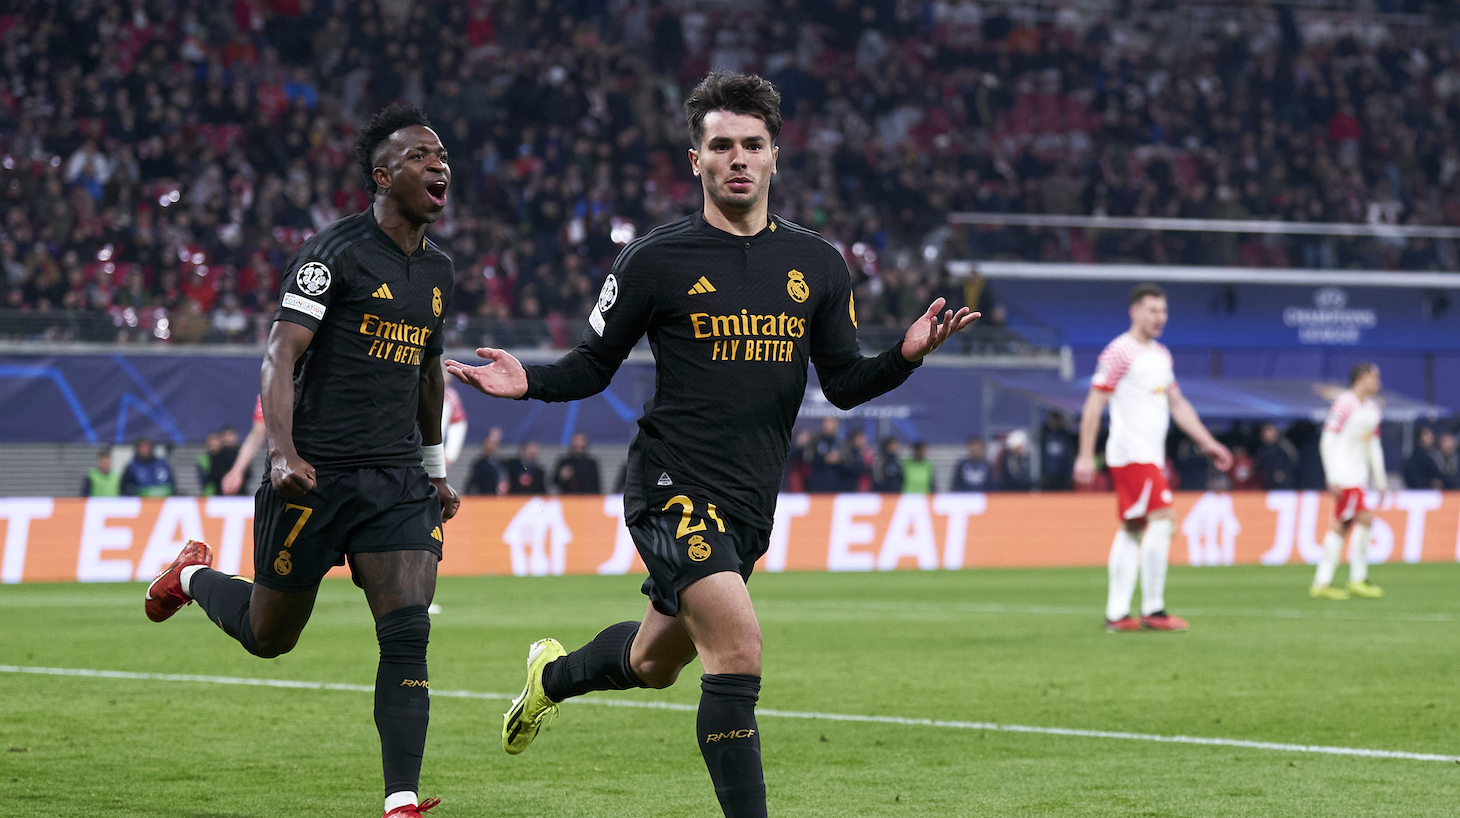 Brahim Diaz of Real Madrid CF celebrates after scoring his team's first goal during the UEFA Champions League 2023/24 round of 16 first leg match between RB Leipzig and Real Madrid CF at Red Bull Arena on February 13, 2024 in Leipzig, Germany.